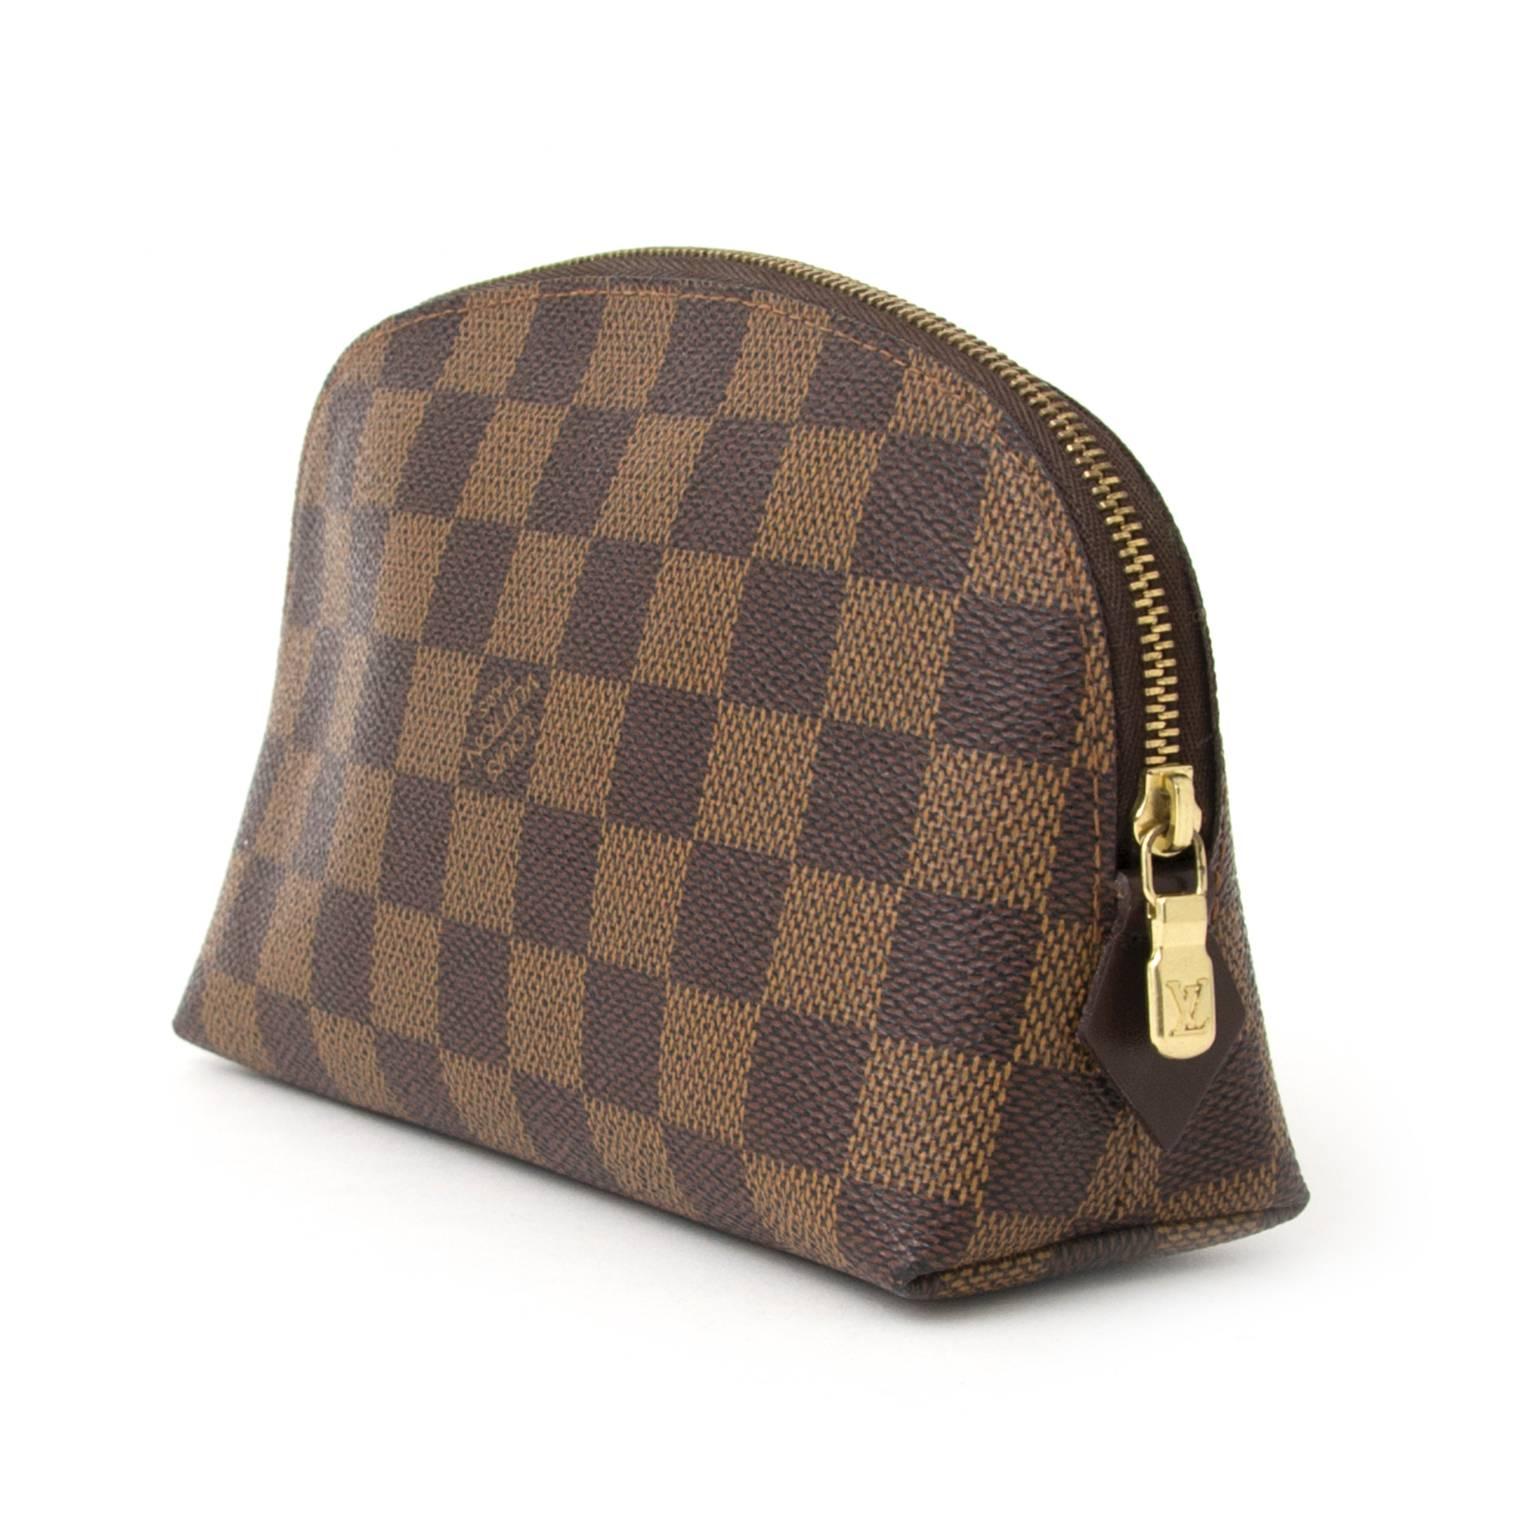 Louis Vuitton cosmetic pouch in damier ebene.

Practical cosmetics pouch with zipper to easily store all your small products. 

It features a flat pocket, ideal for holding a mirror.